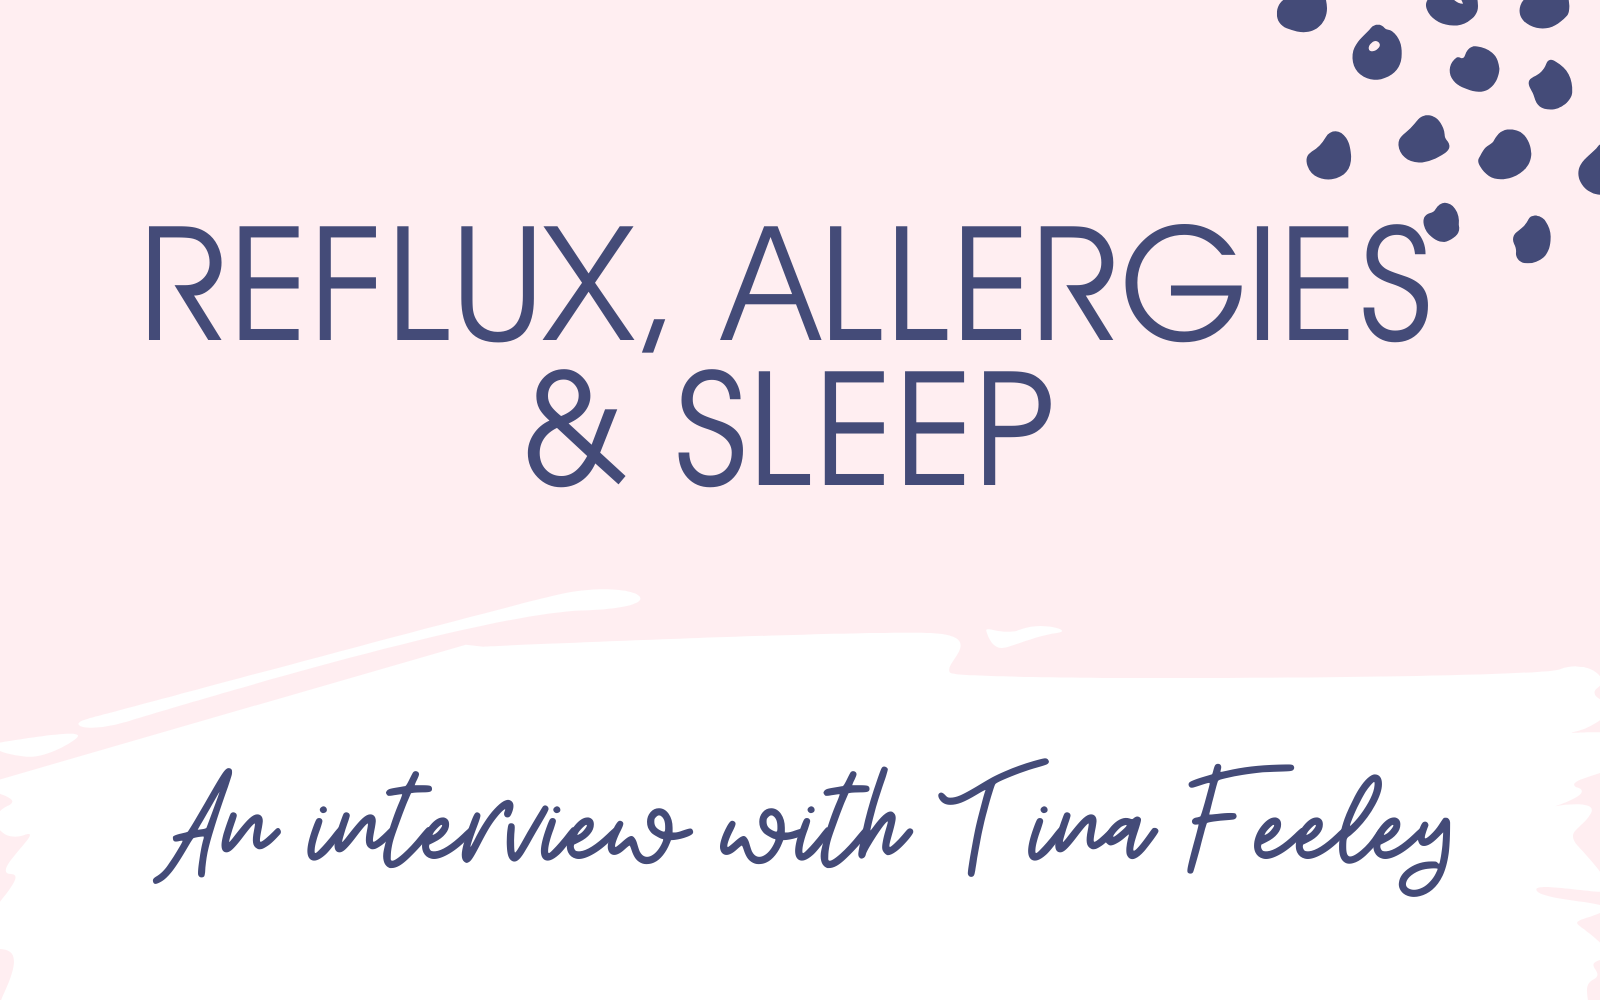 Reflux, Allergies & Sleep: An interview with Pediatrician Tina Feeley